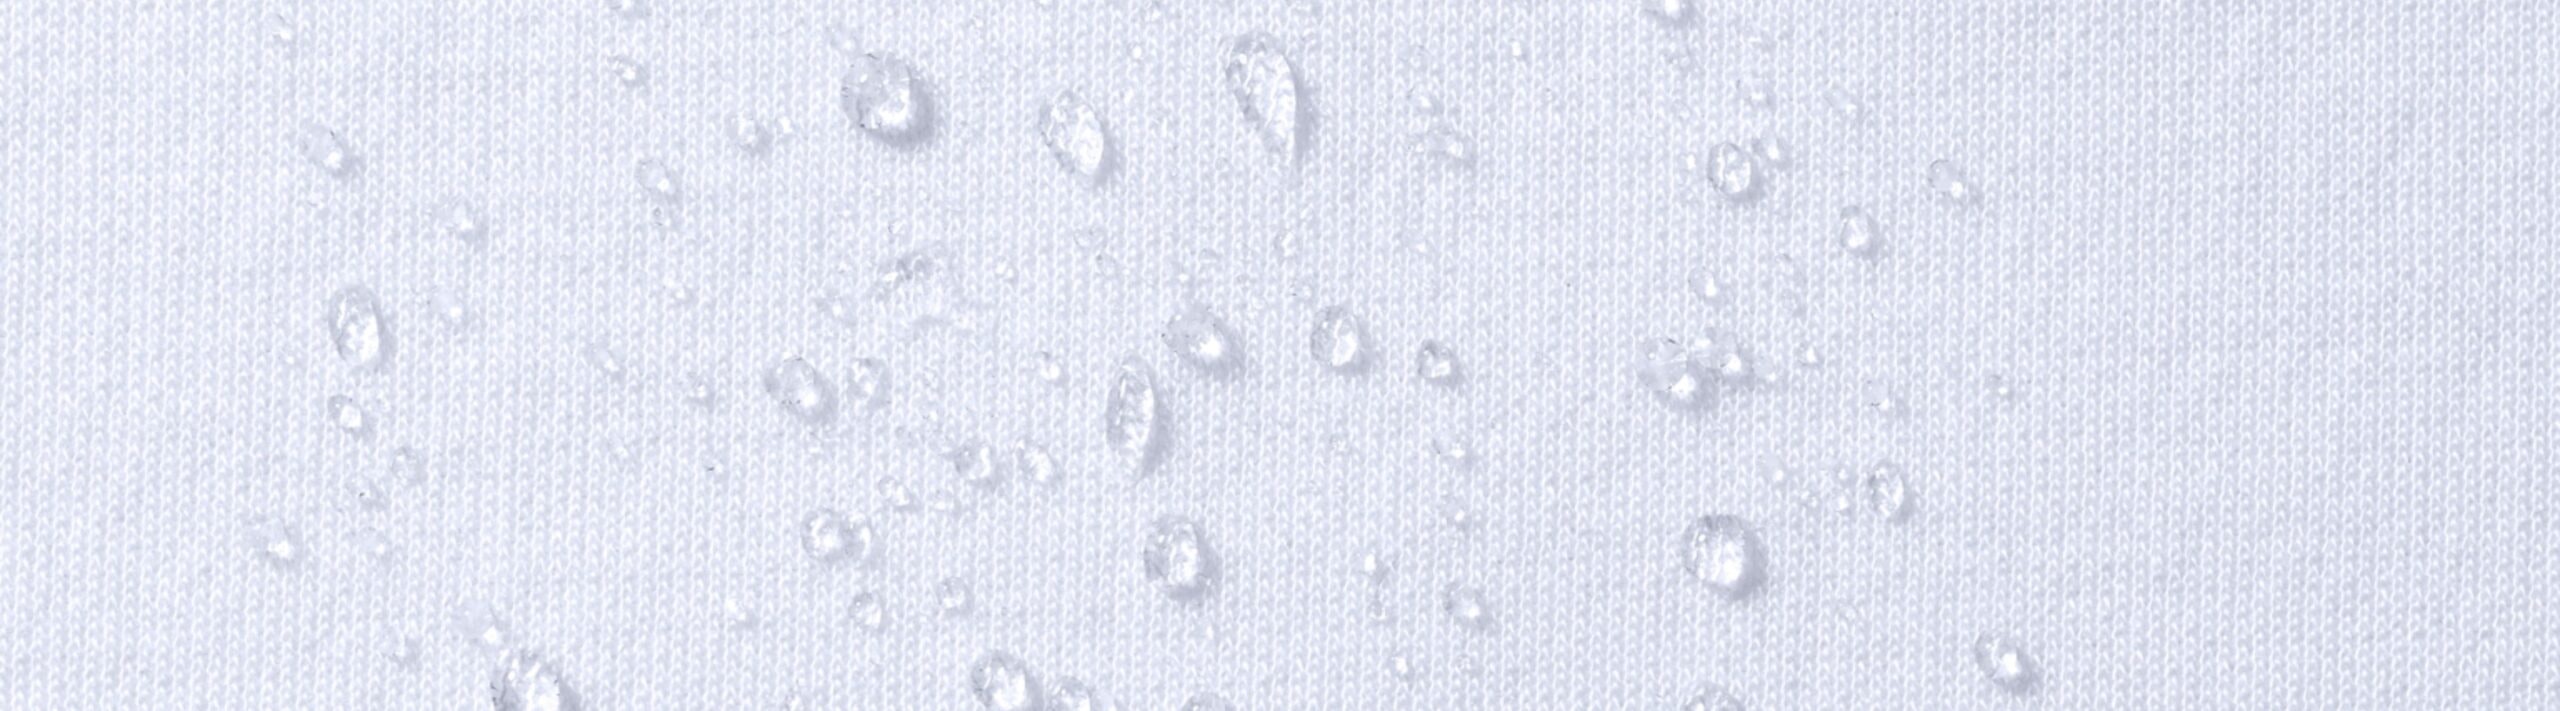 Water drops on mattress protector